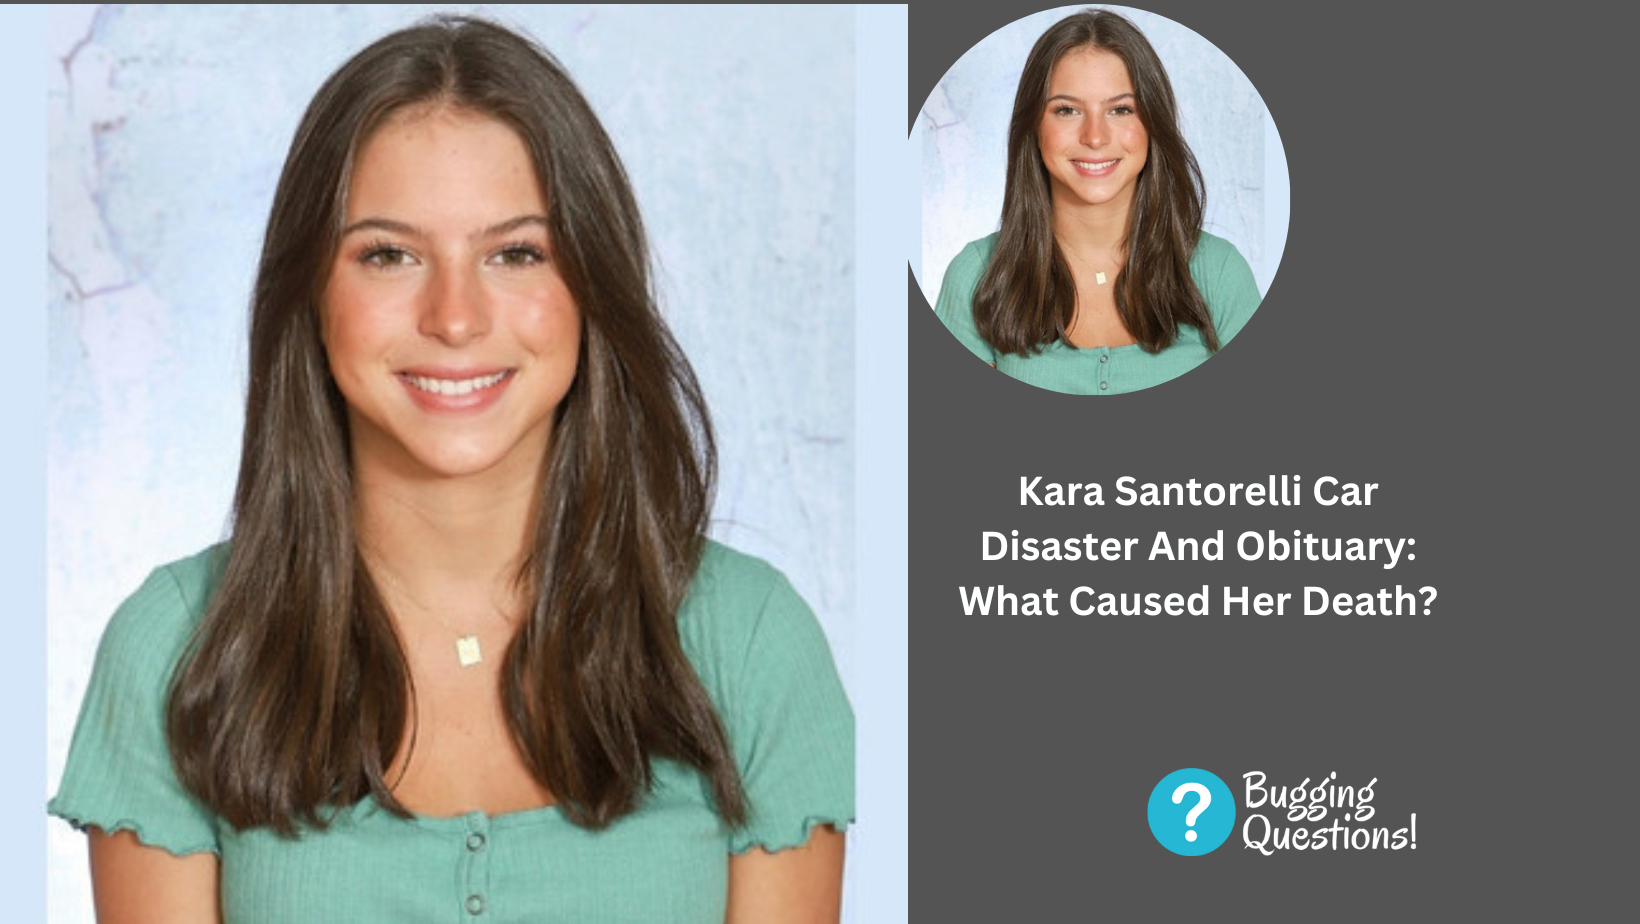 Kara Santorelli Car Disaster And Obituary: What Caused Her Death?